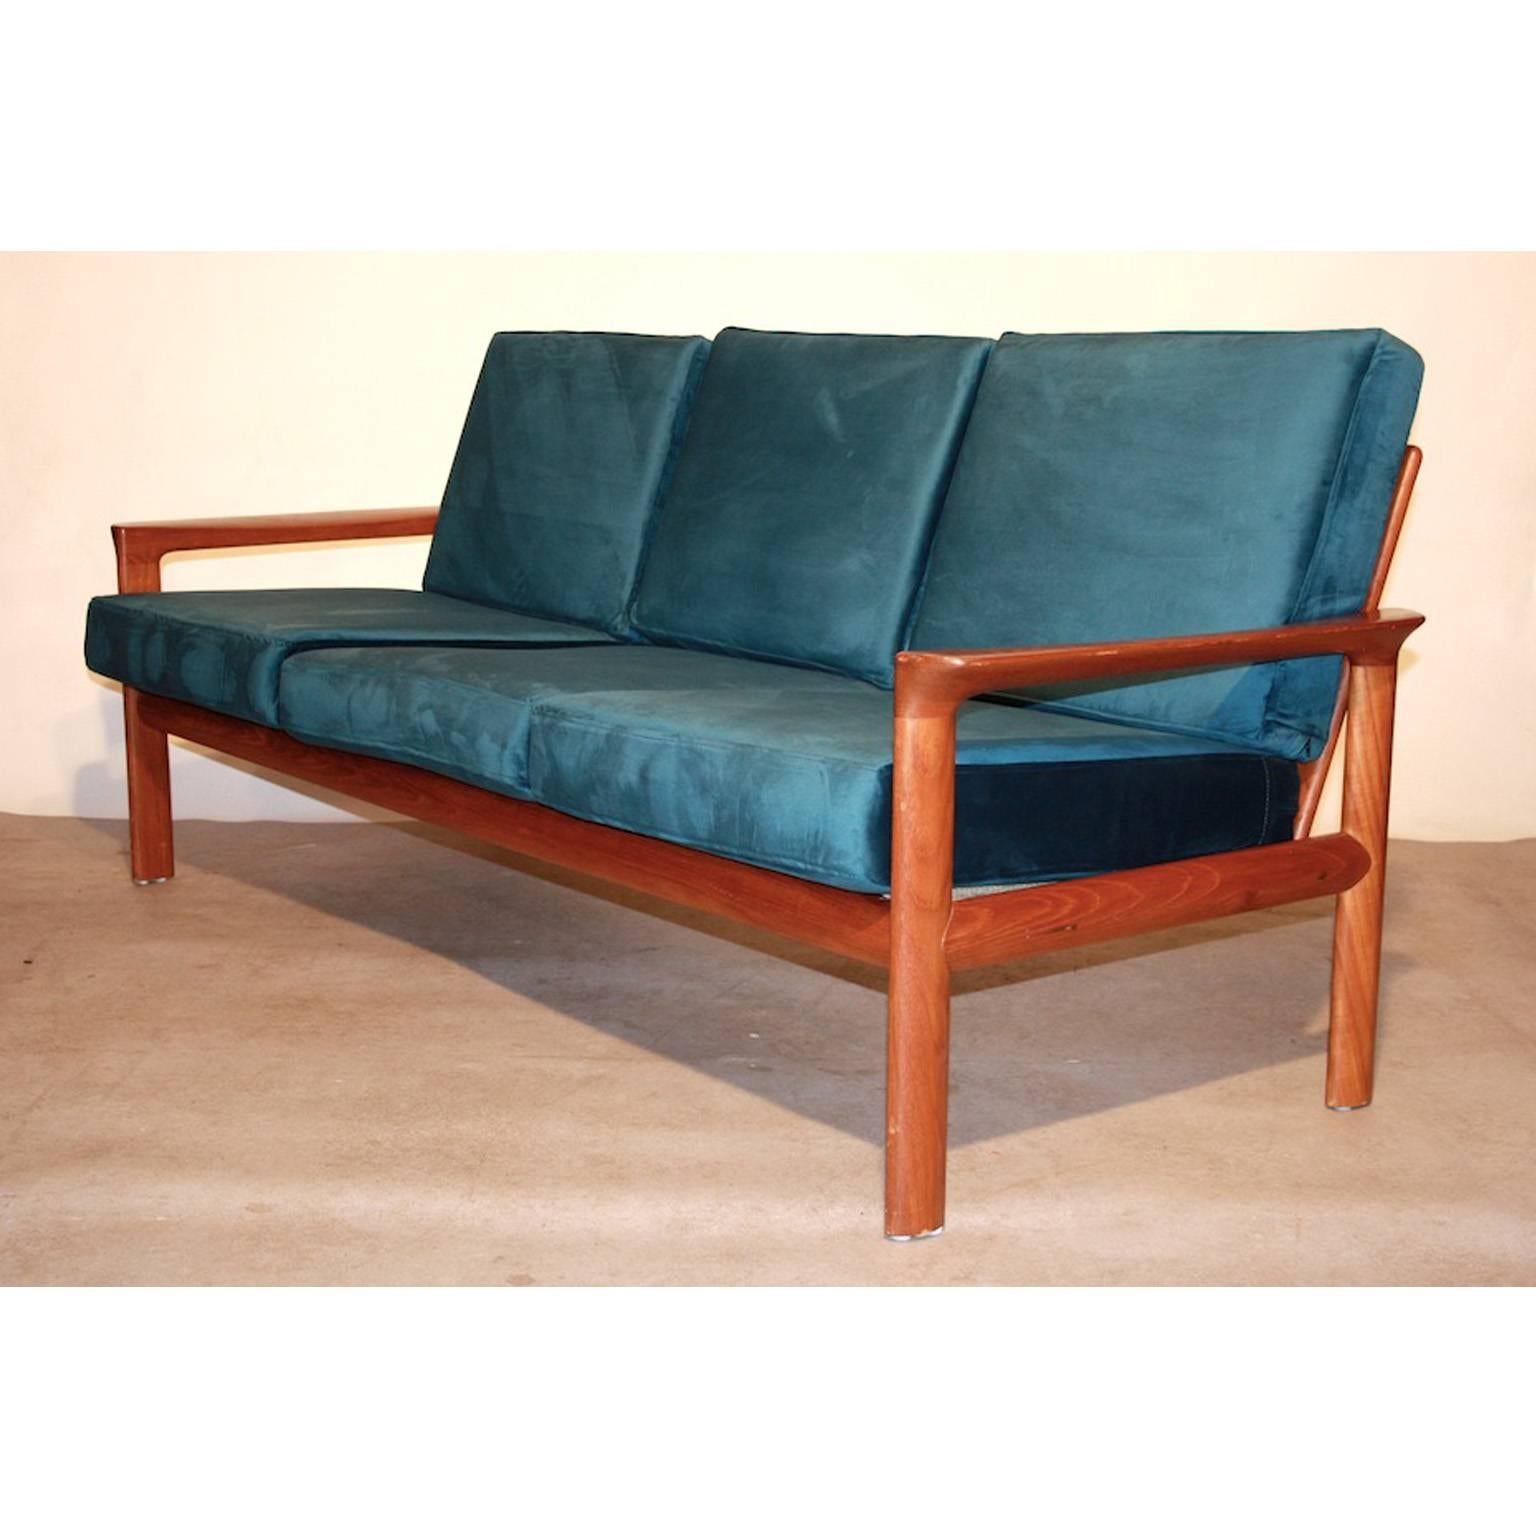 Sven Ellekaer for Komfort sofa “Borneo”, Denmark, 1960s

Beautiful Danish teak sofa from the 1960s by Sven Ellekaer. We re-upholstered this Classic sofa in petrol velour. This gives it a more classy and contemporary appearance. We think this suits